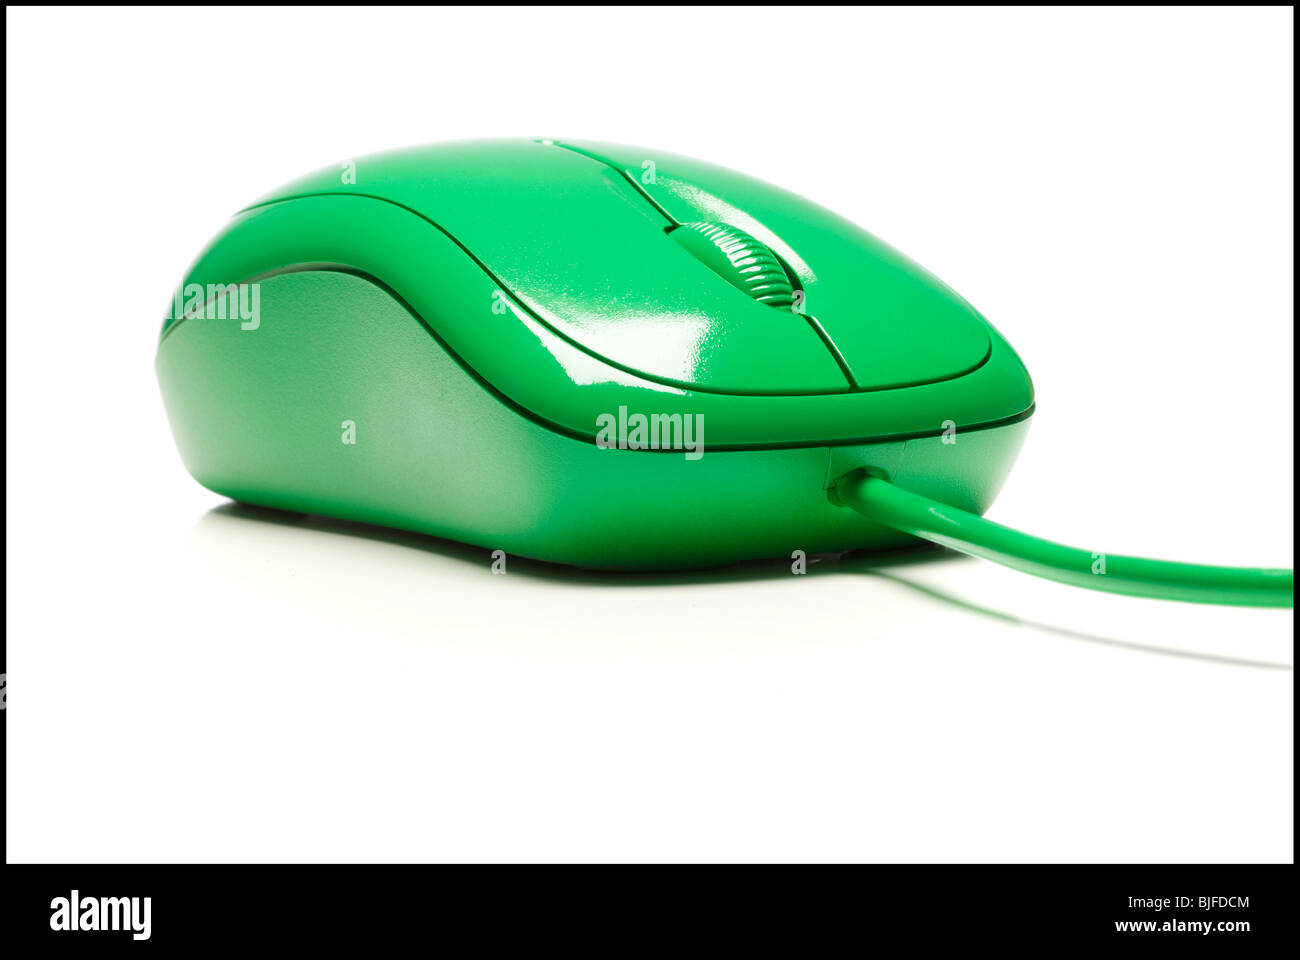 green computer mouse Stock Photo